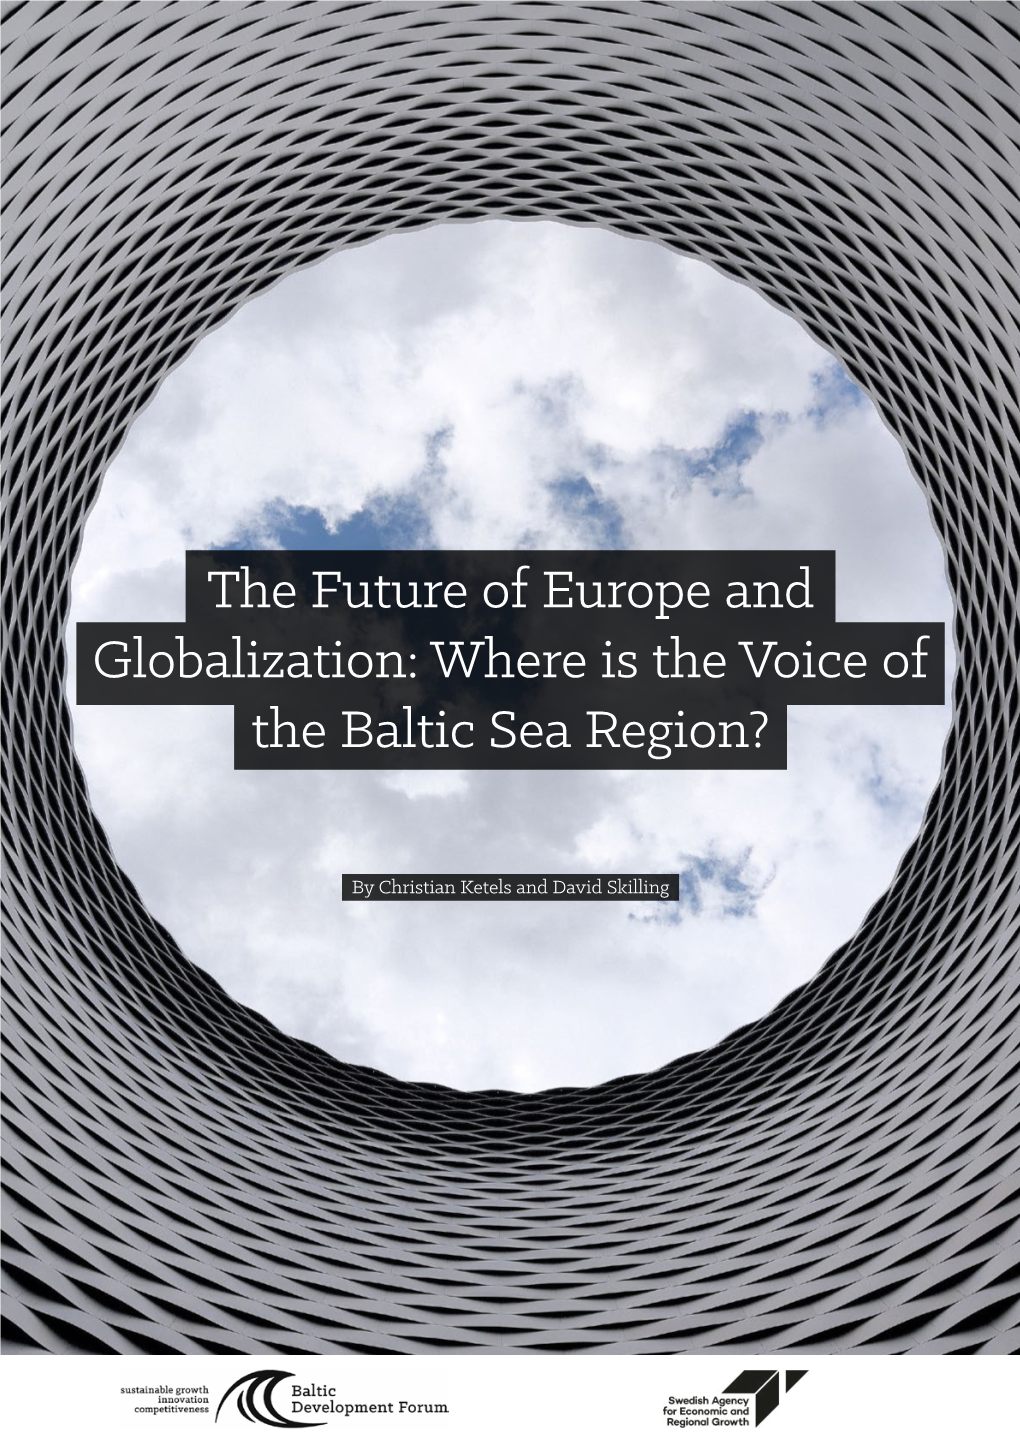 Where Is the Voice of the Baltic Sea Region?